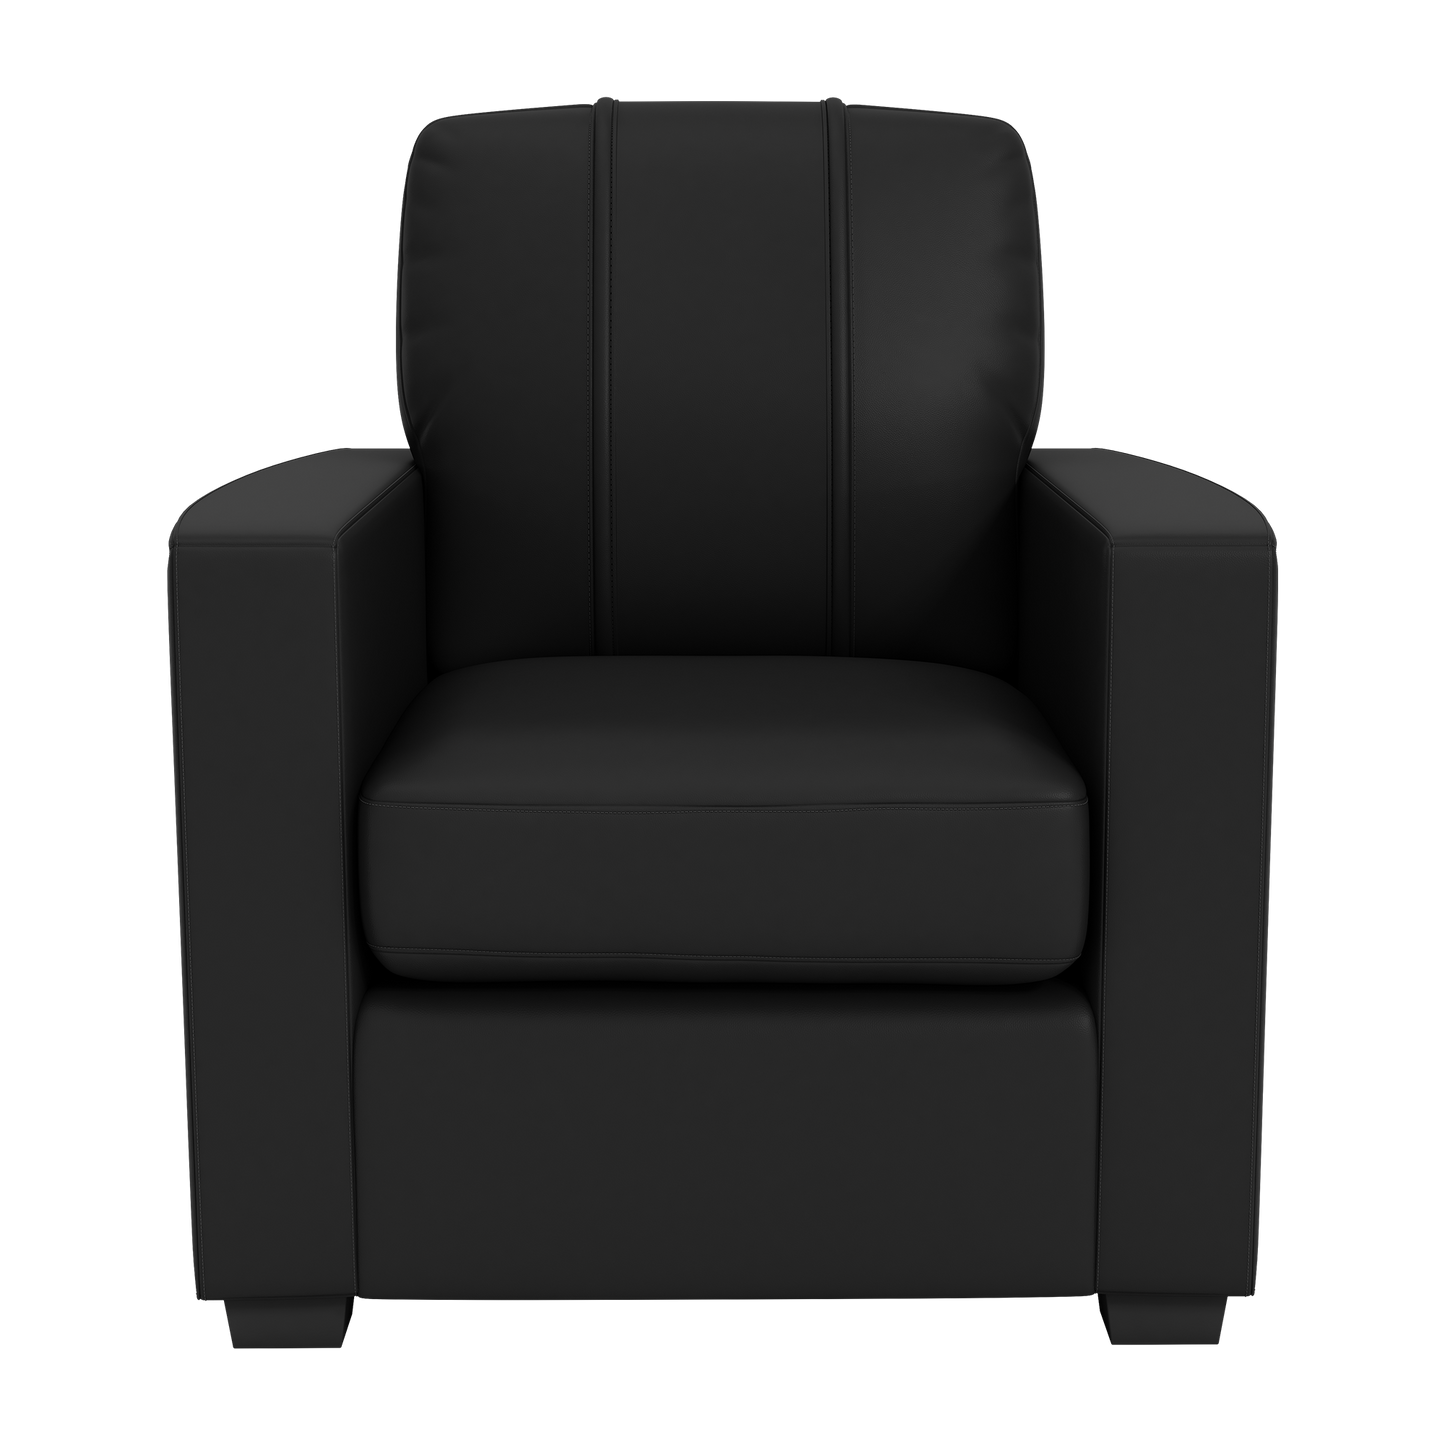 Silver Club Chair with Wisconsin Badgers Logo